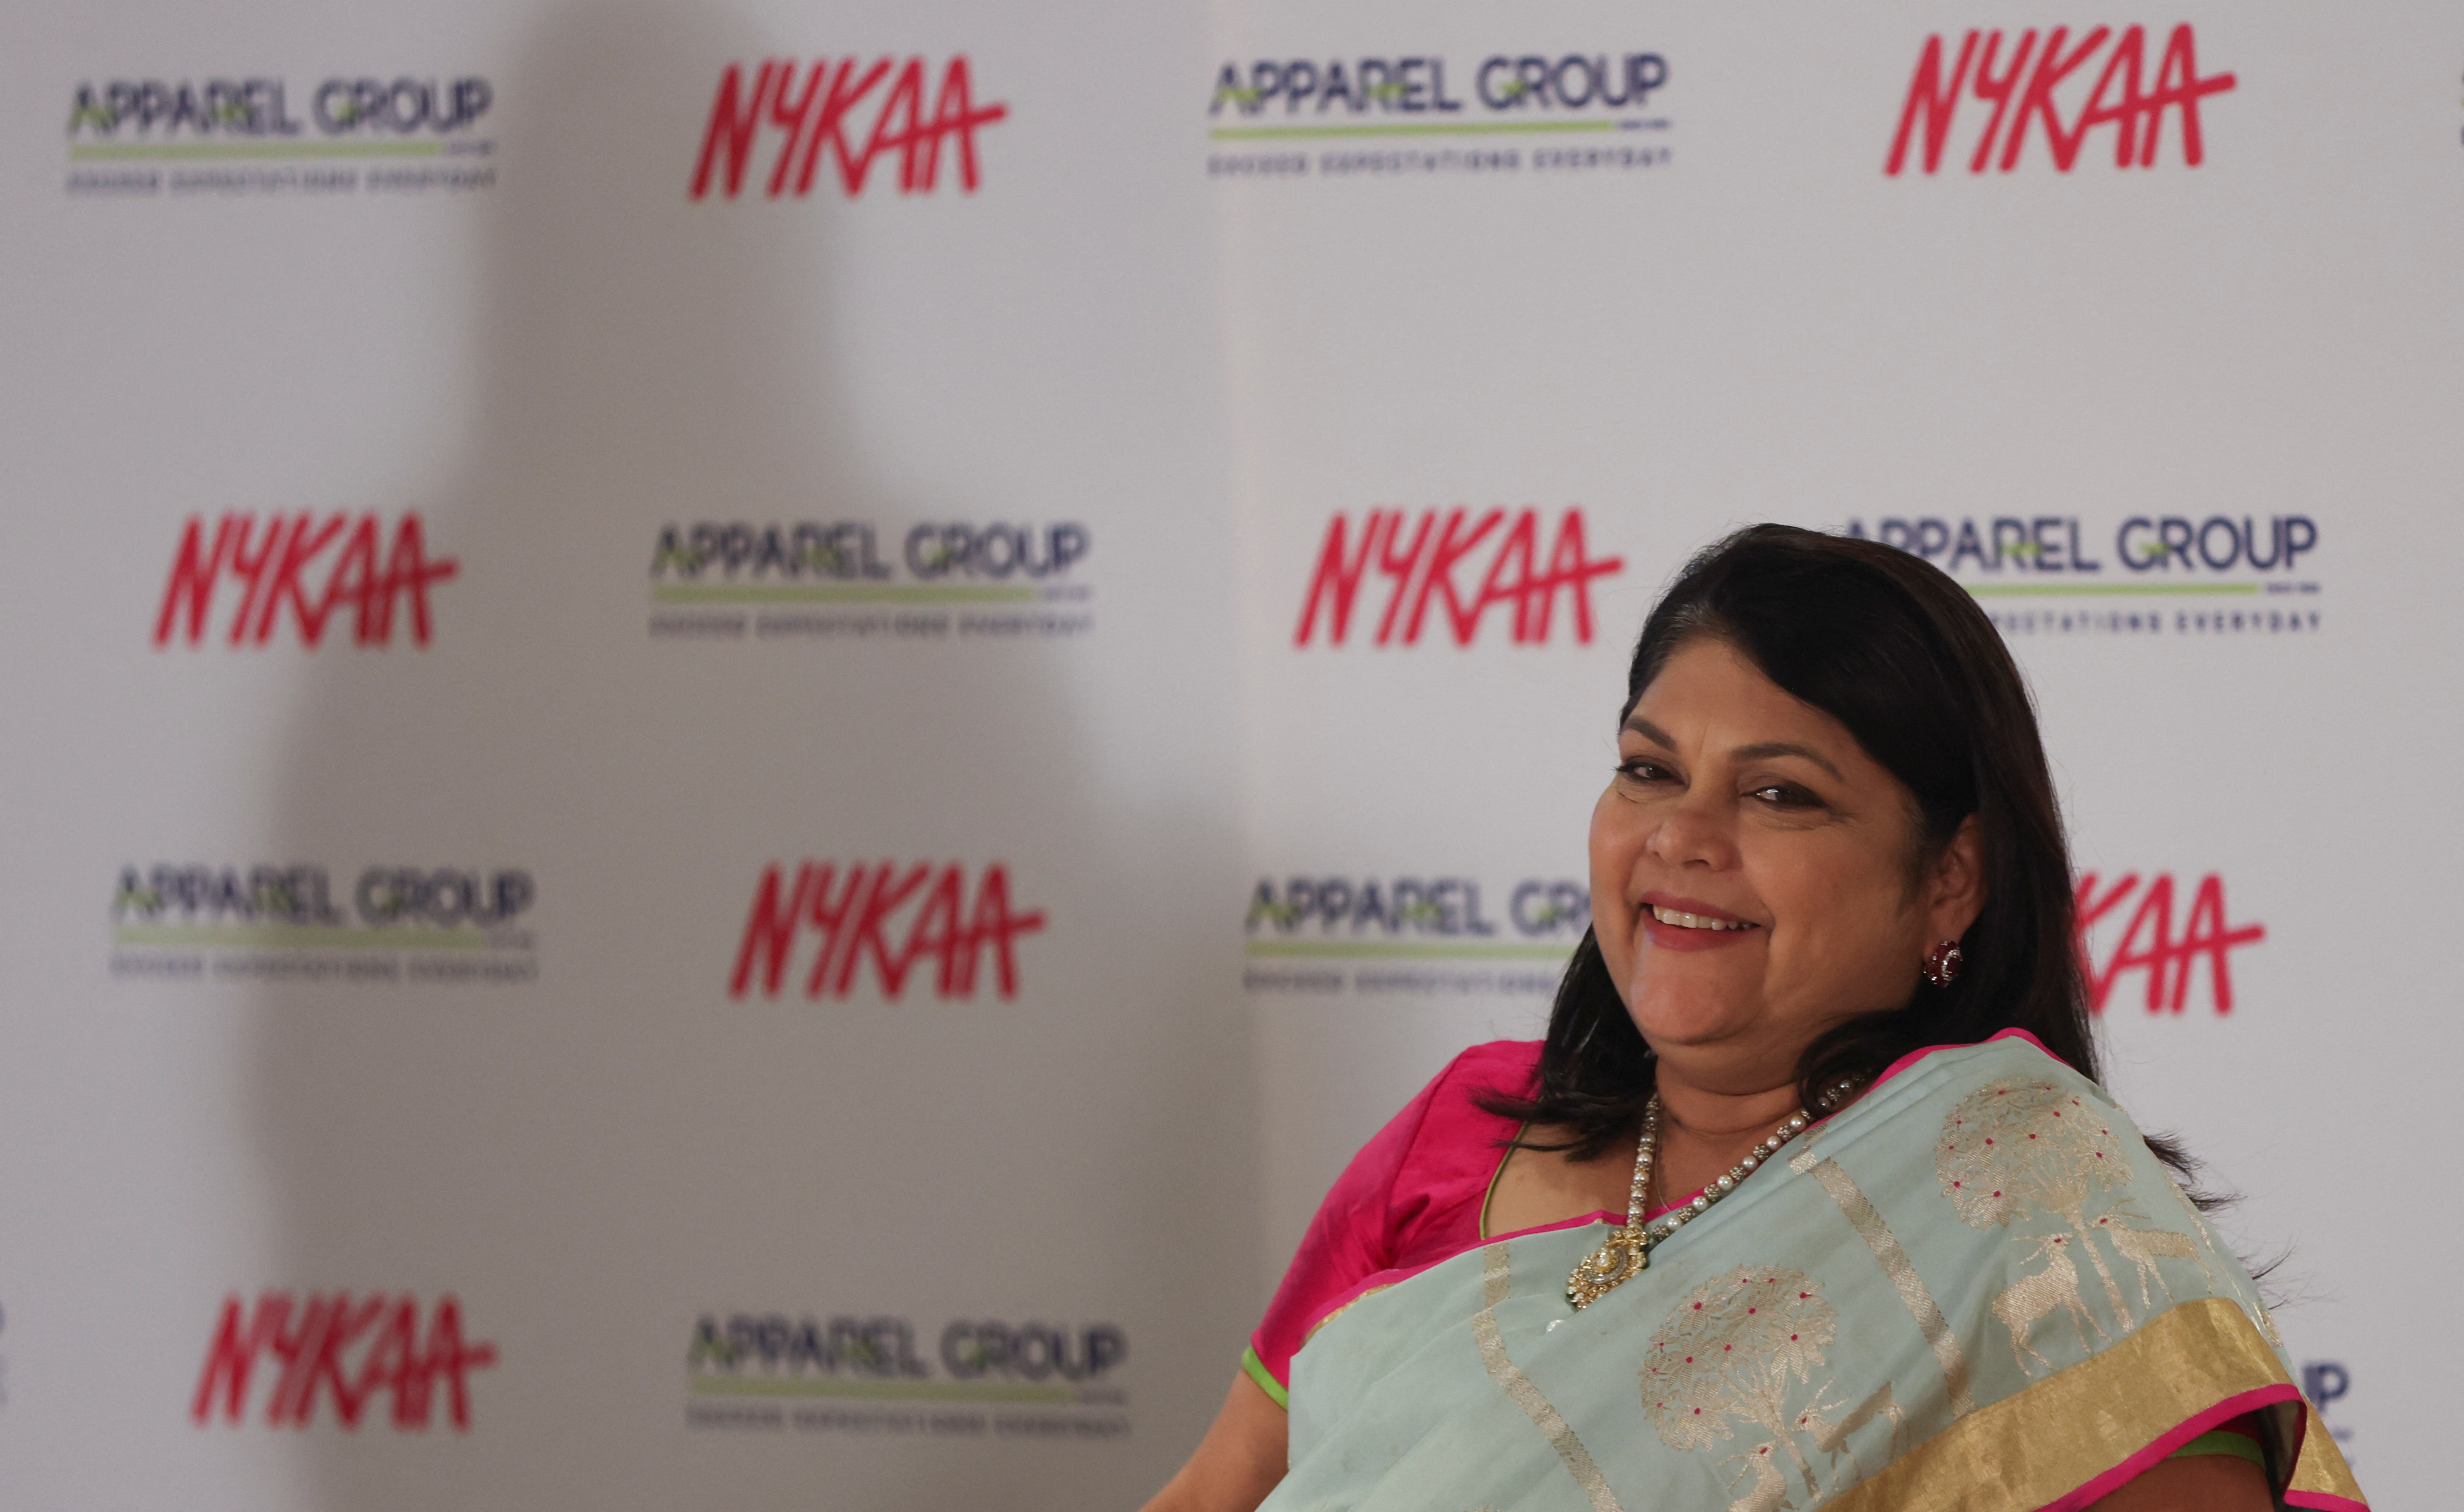 Nykaa Fashion expands activewear portfolio by acquiring Kica